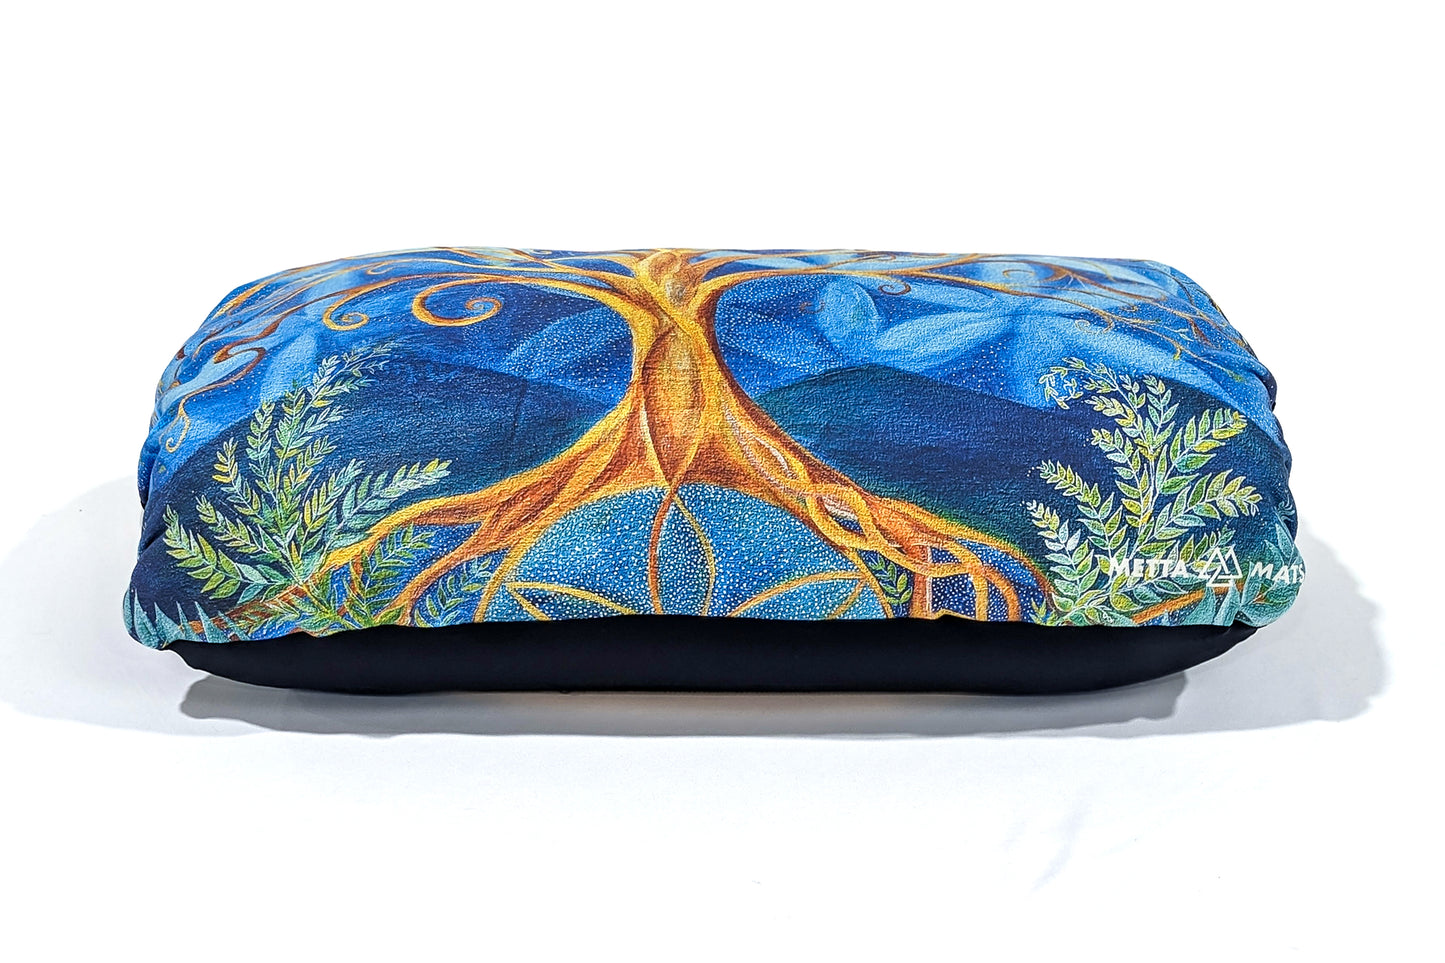 "Alchemical Growth" Bolster Cover